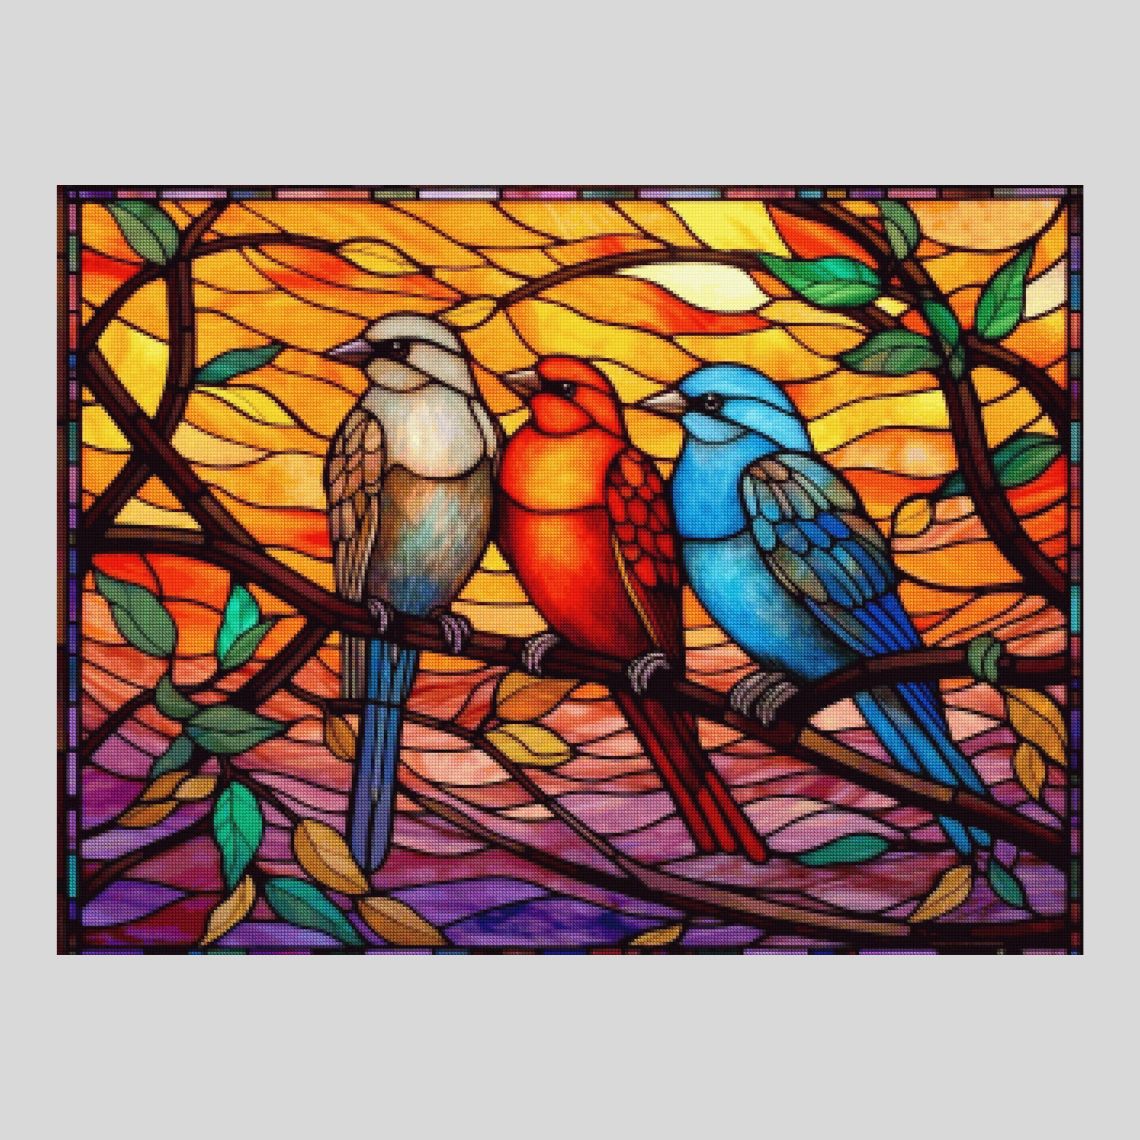 Contemporary Stained Glass Art for Bird Lovers. 'Tree Swallow